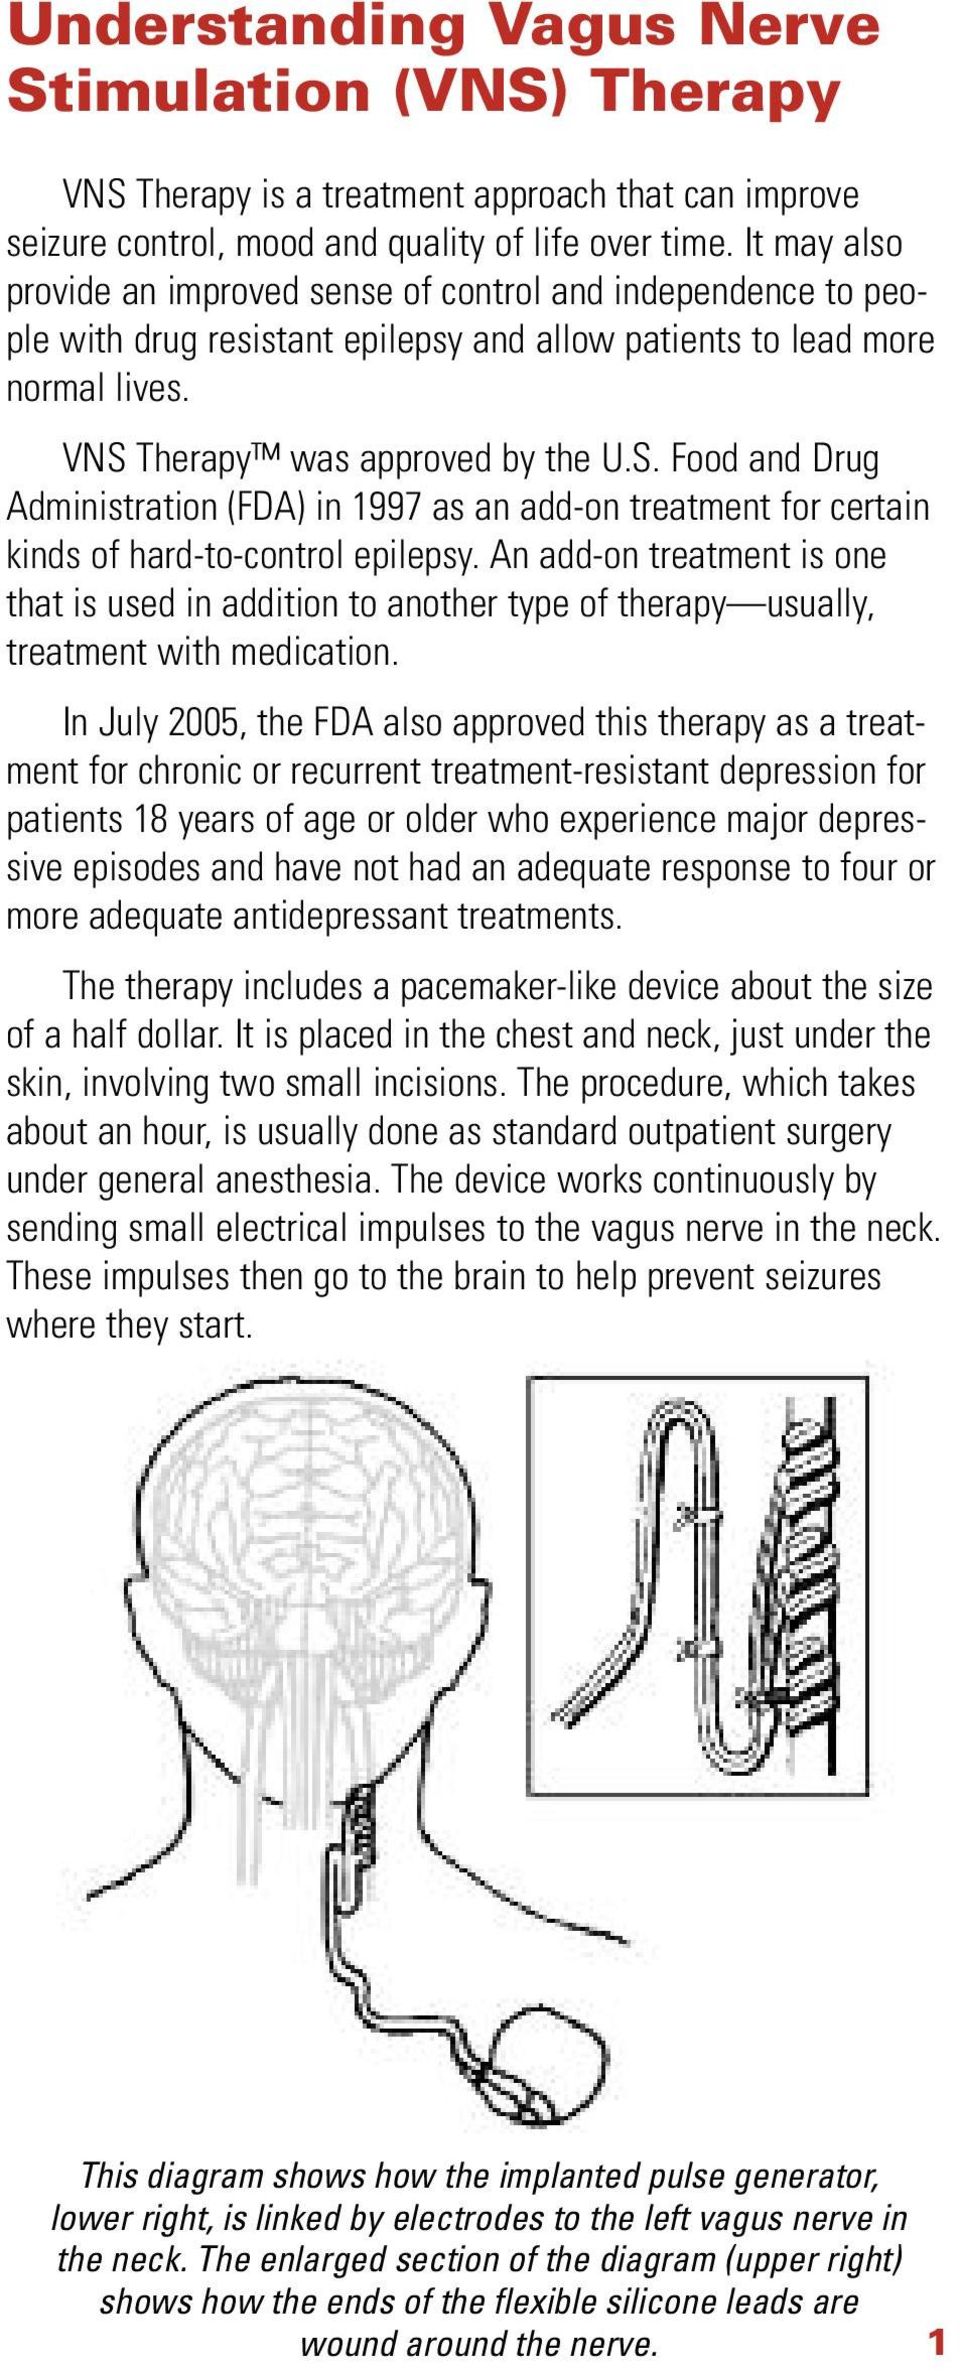 Therapy was approved by the U.S. Food and Drug Administration (FDA) in 1997 as an add-on treatment for certain kinds of hard-to-control epilepsy.